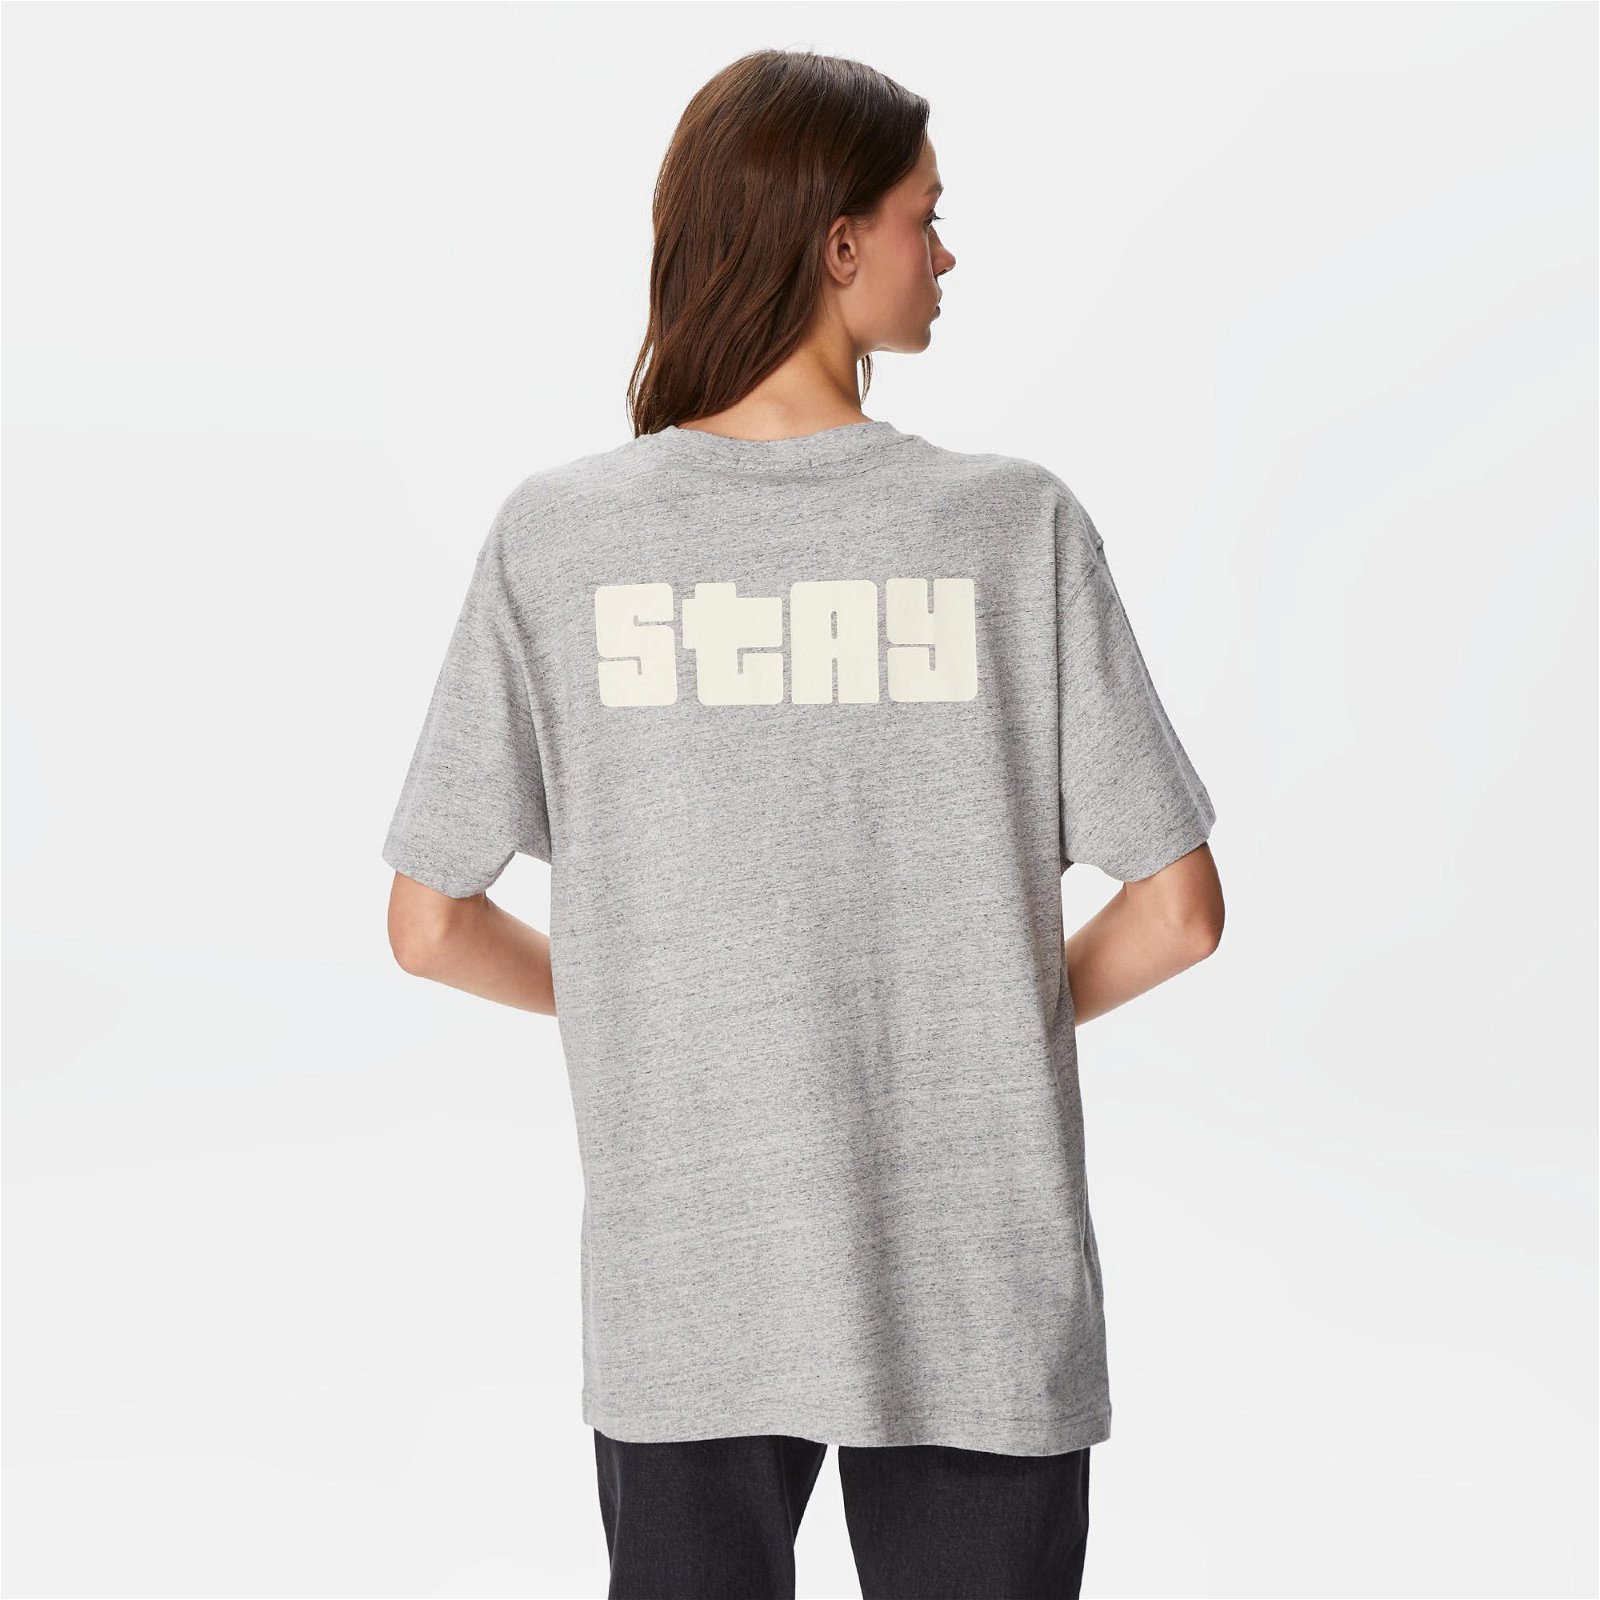 The Stay Line Epic Unisex Gri T-Shirt